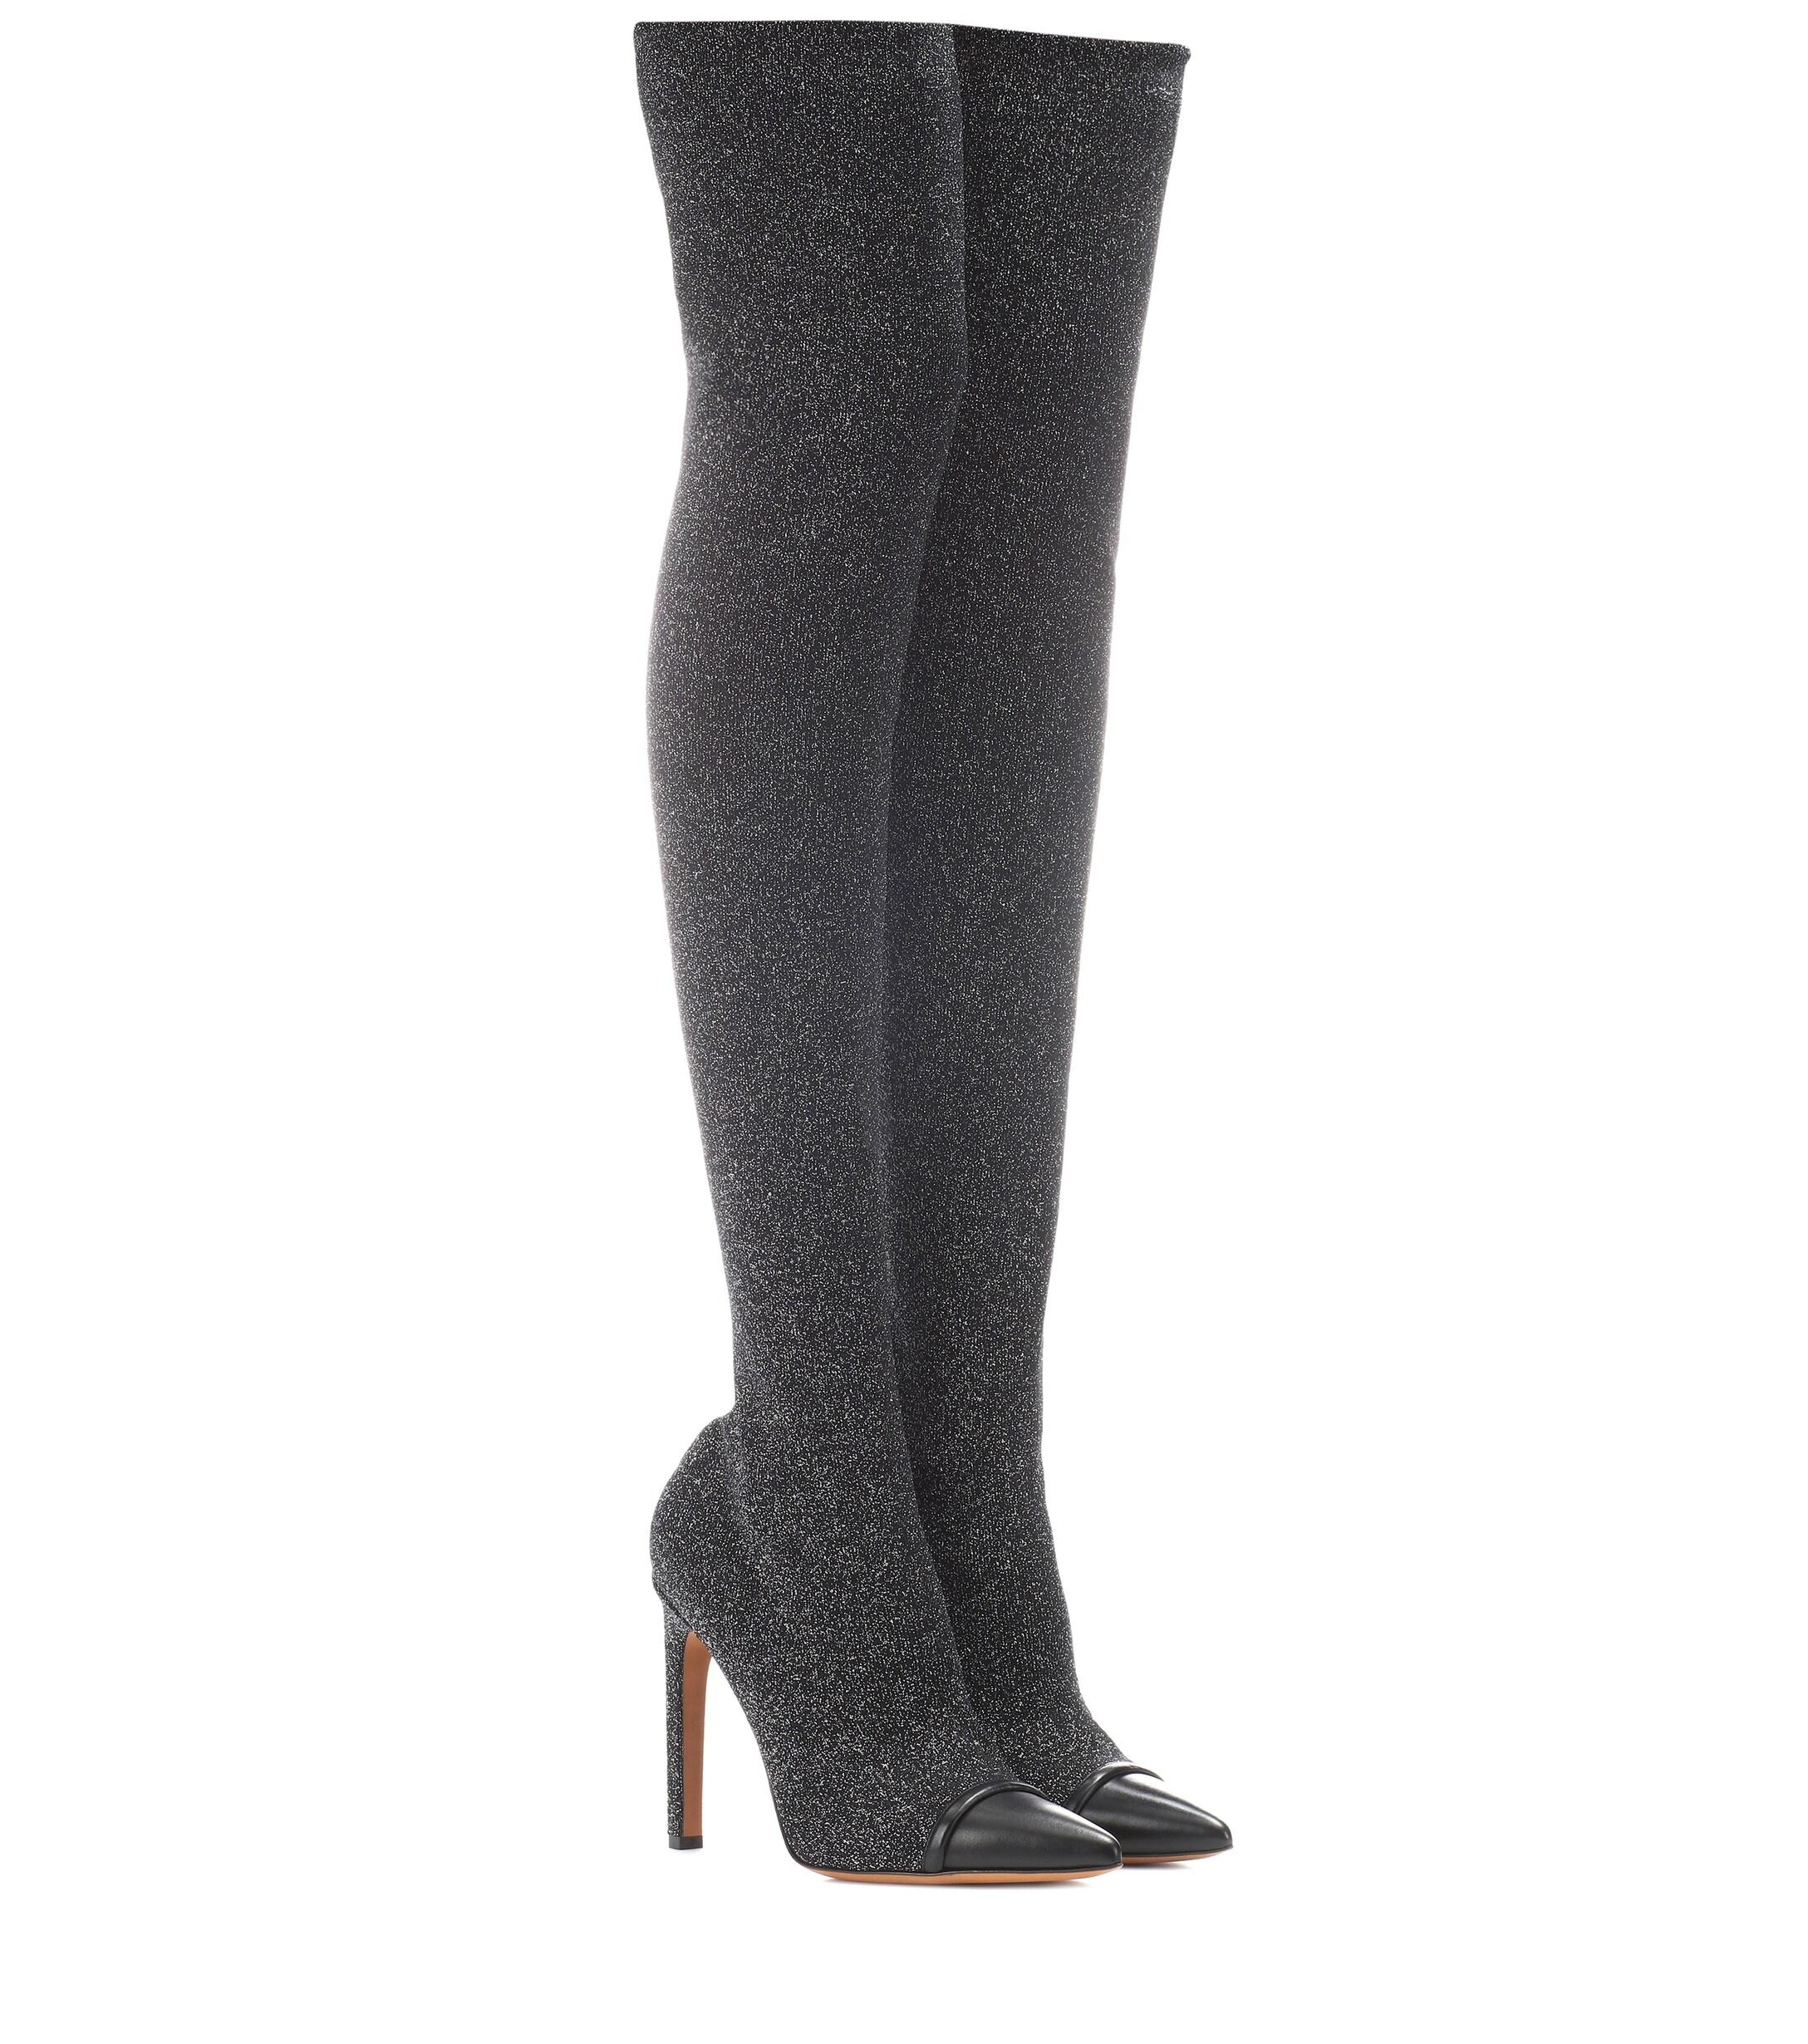 Givenchy Graphic Over-the-knee Boots in Silver (Black) - Lyst